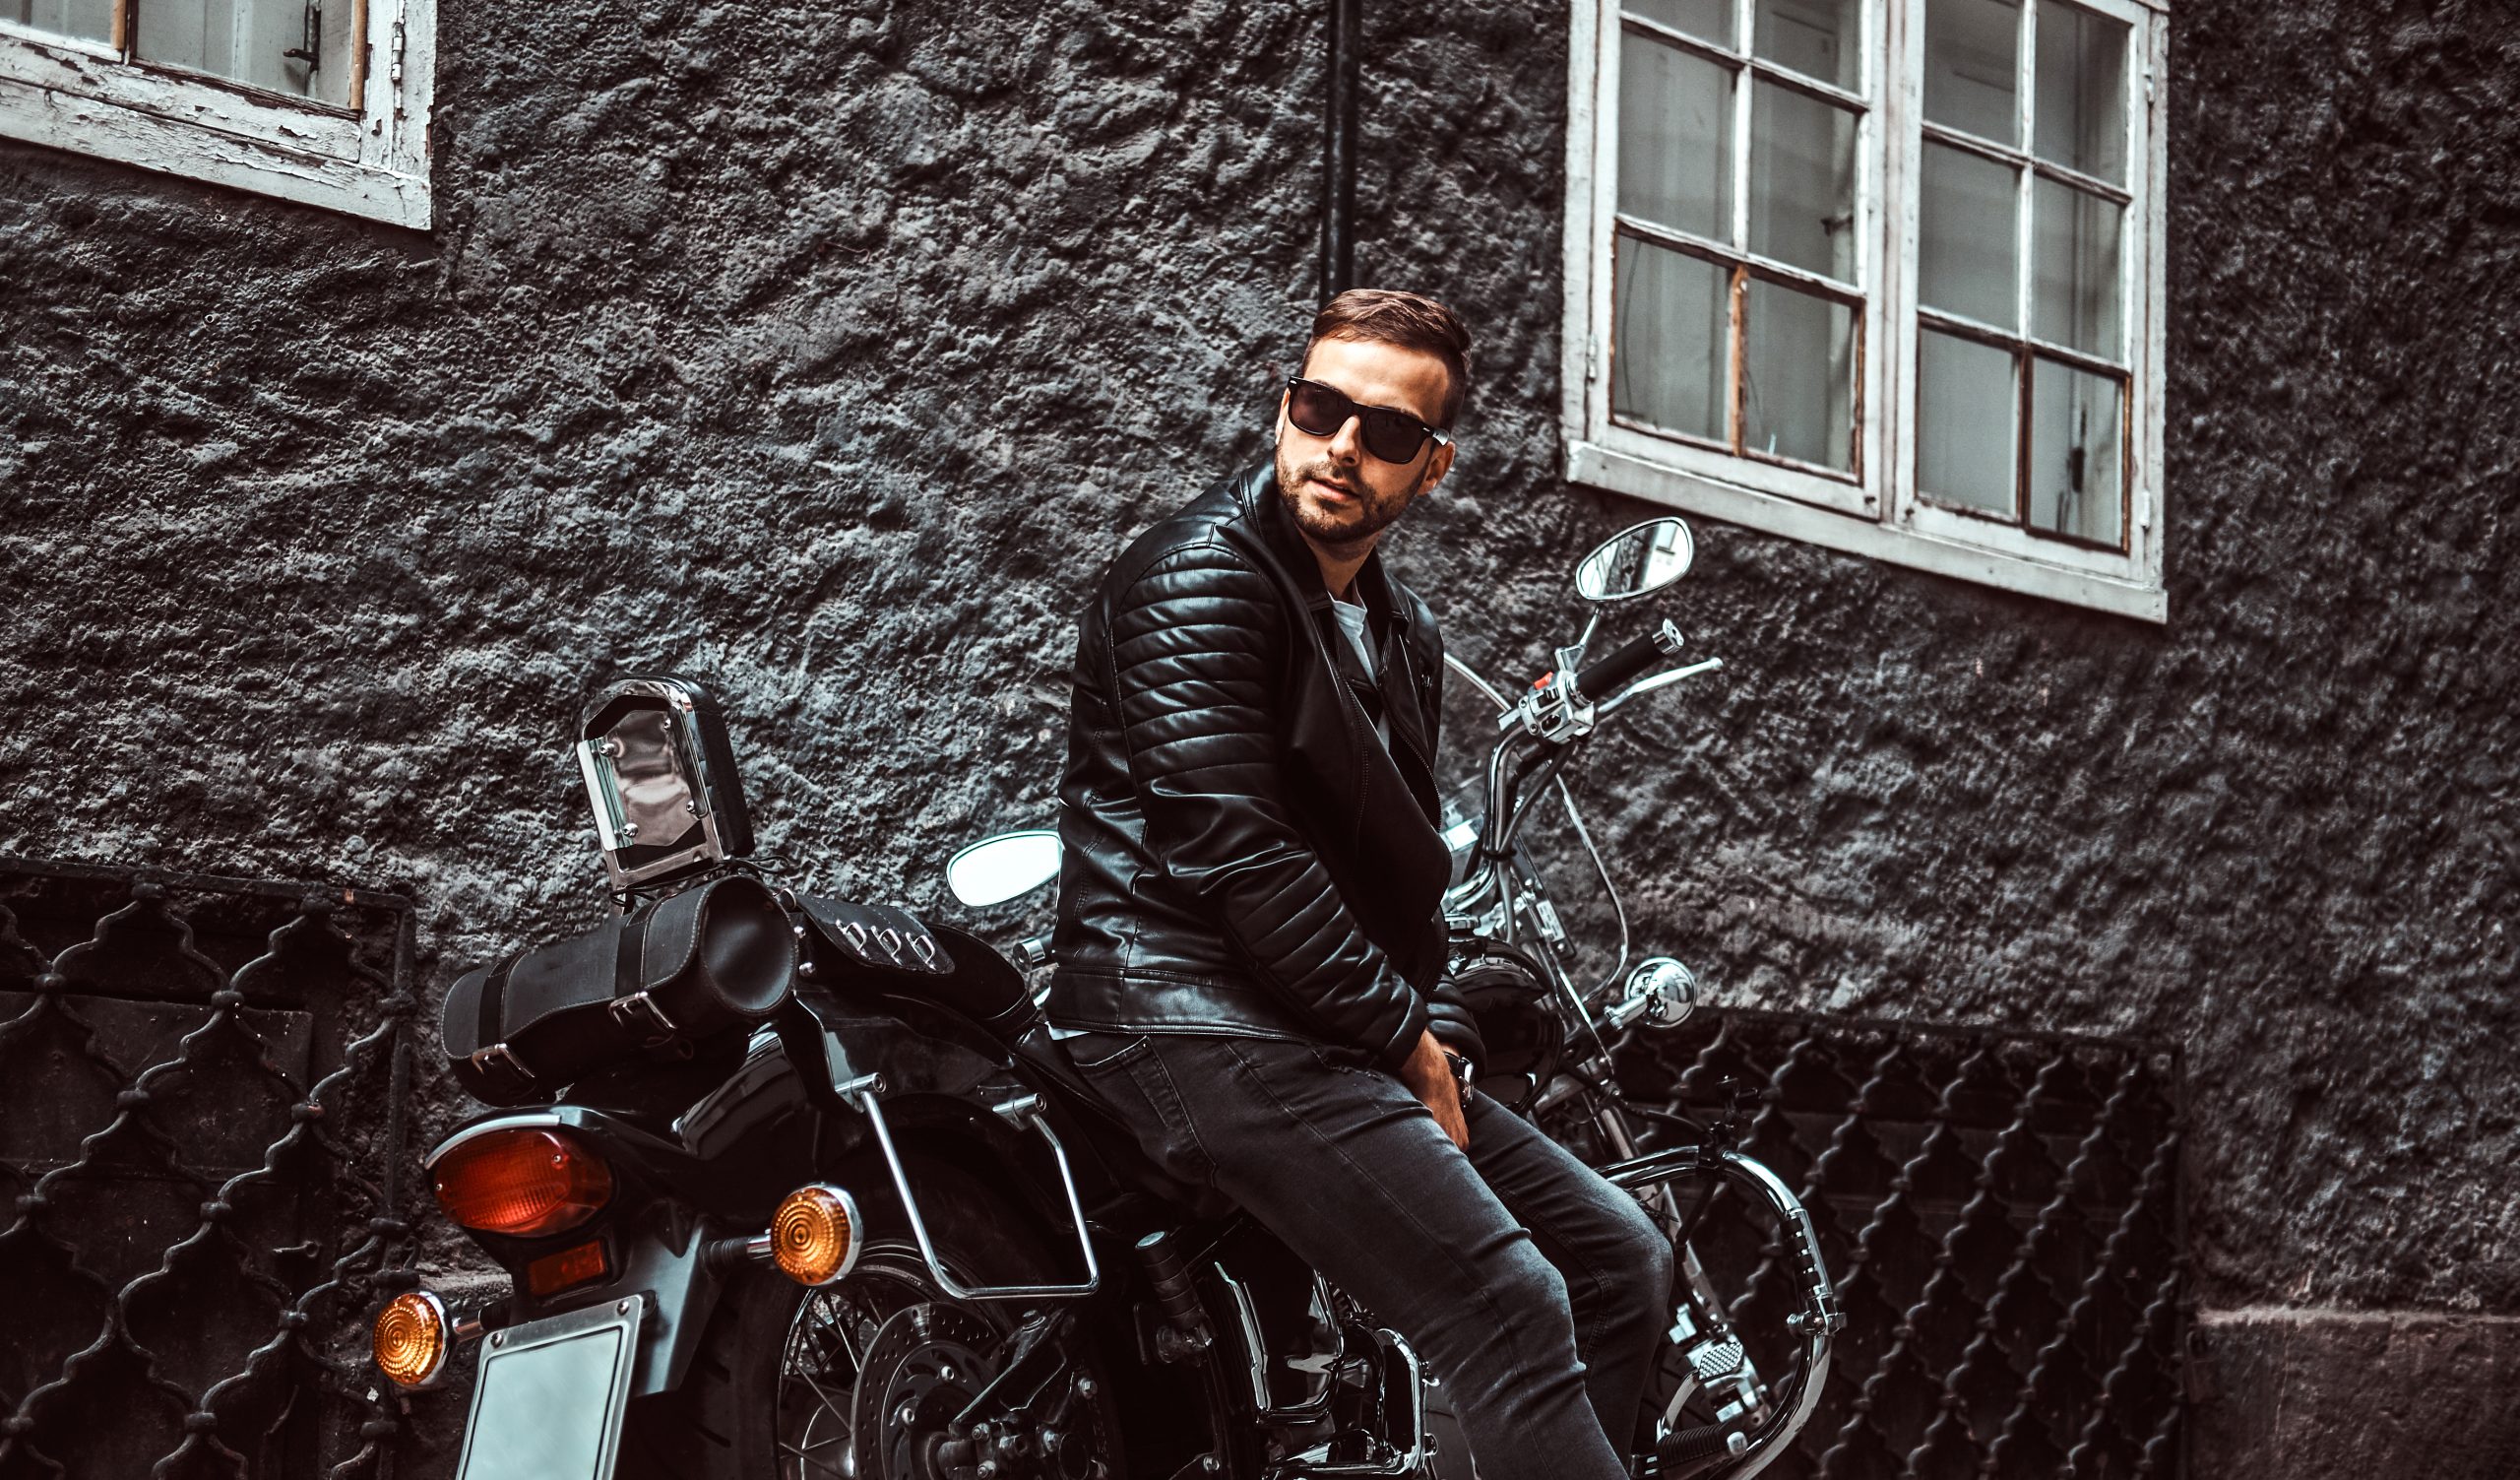 Fashionable biker leaning on his retro motorcycle on an old Europe street.